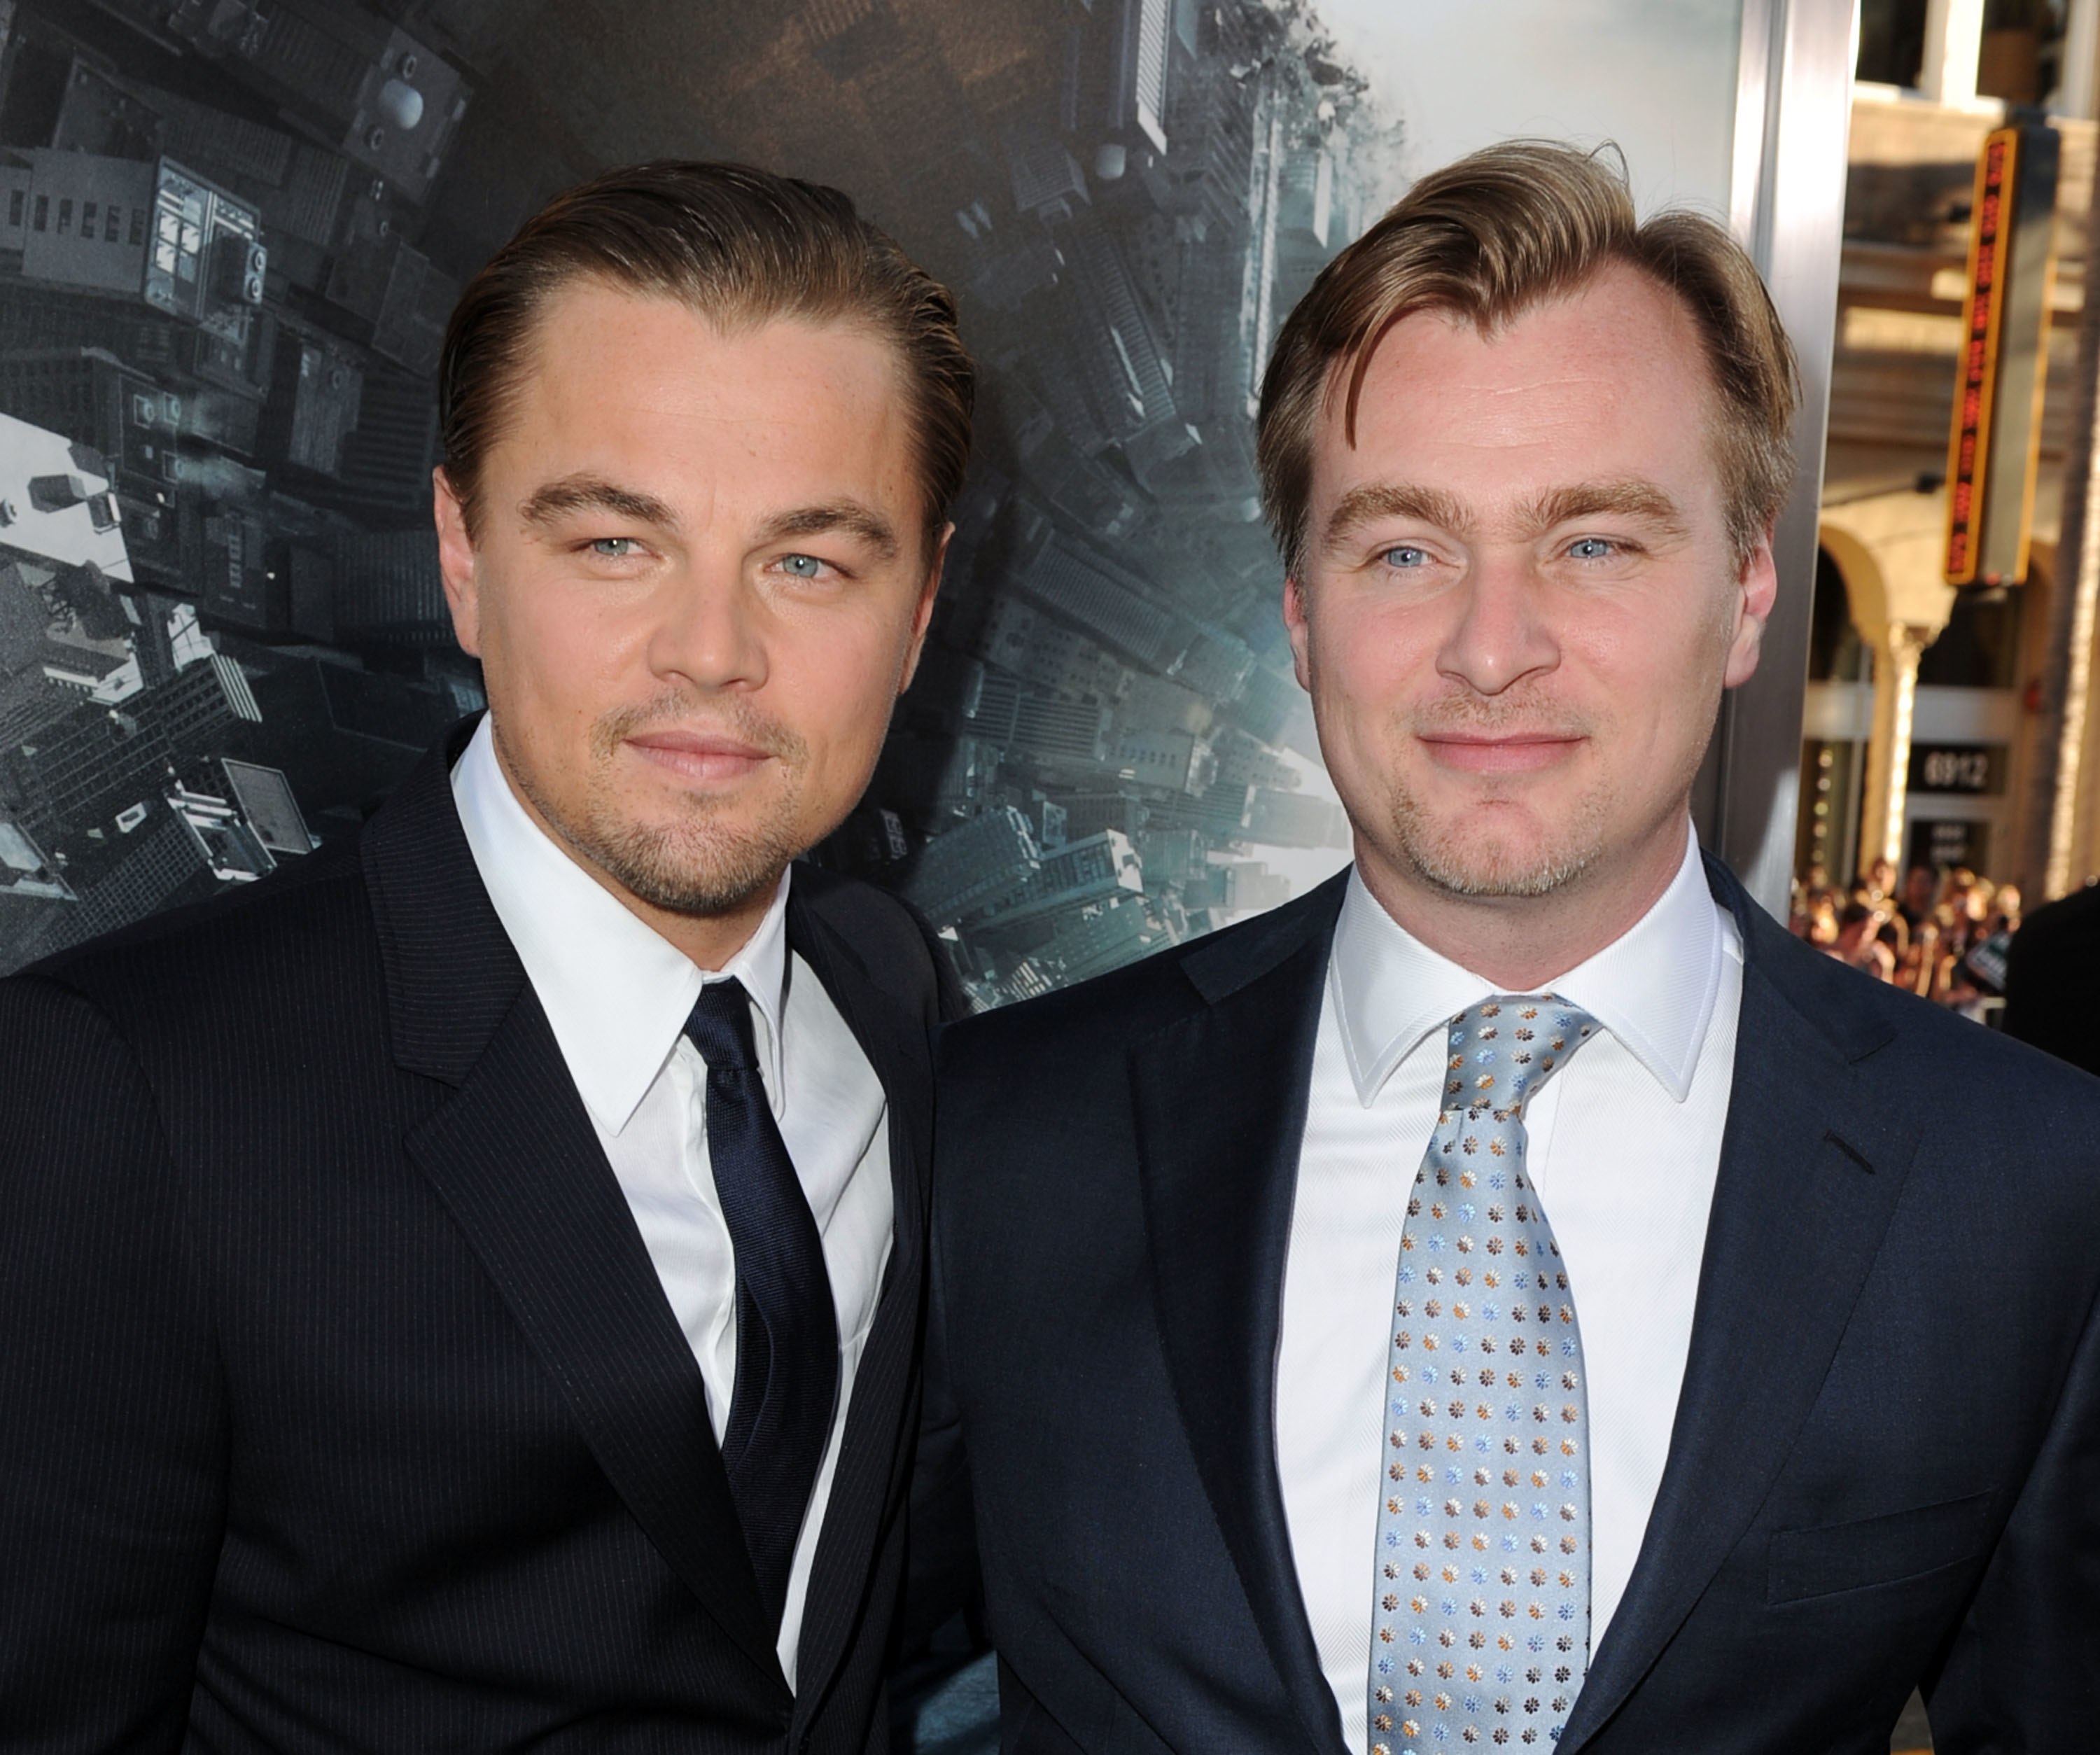 A close-up of Christopher and Leonardo in suits and ties